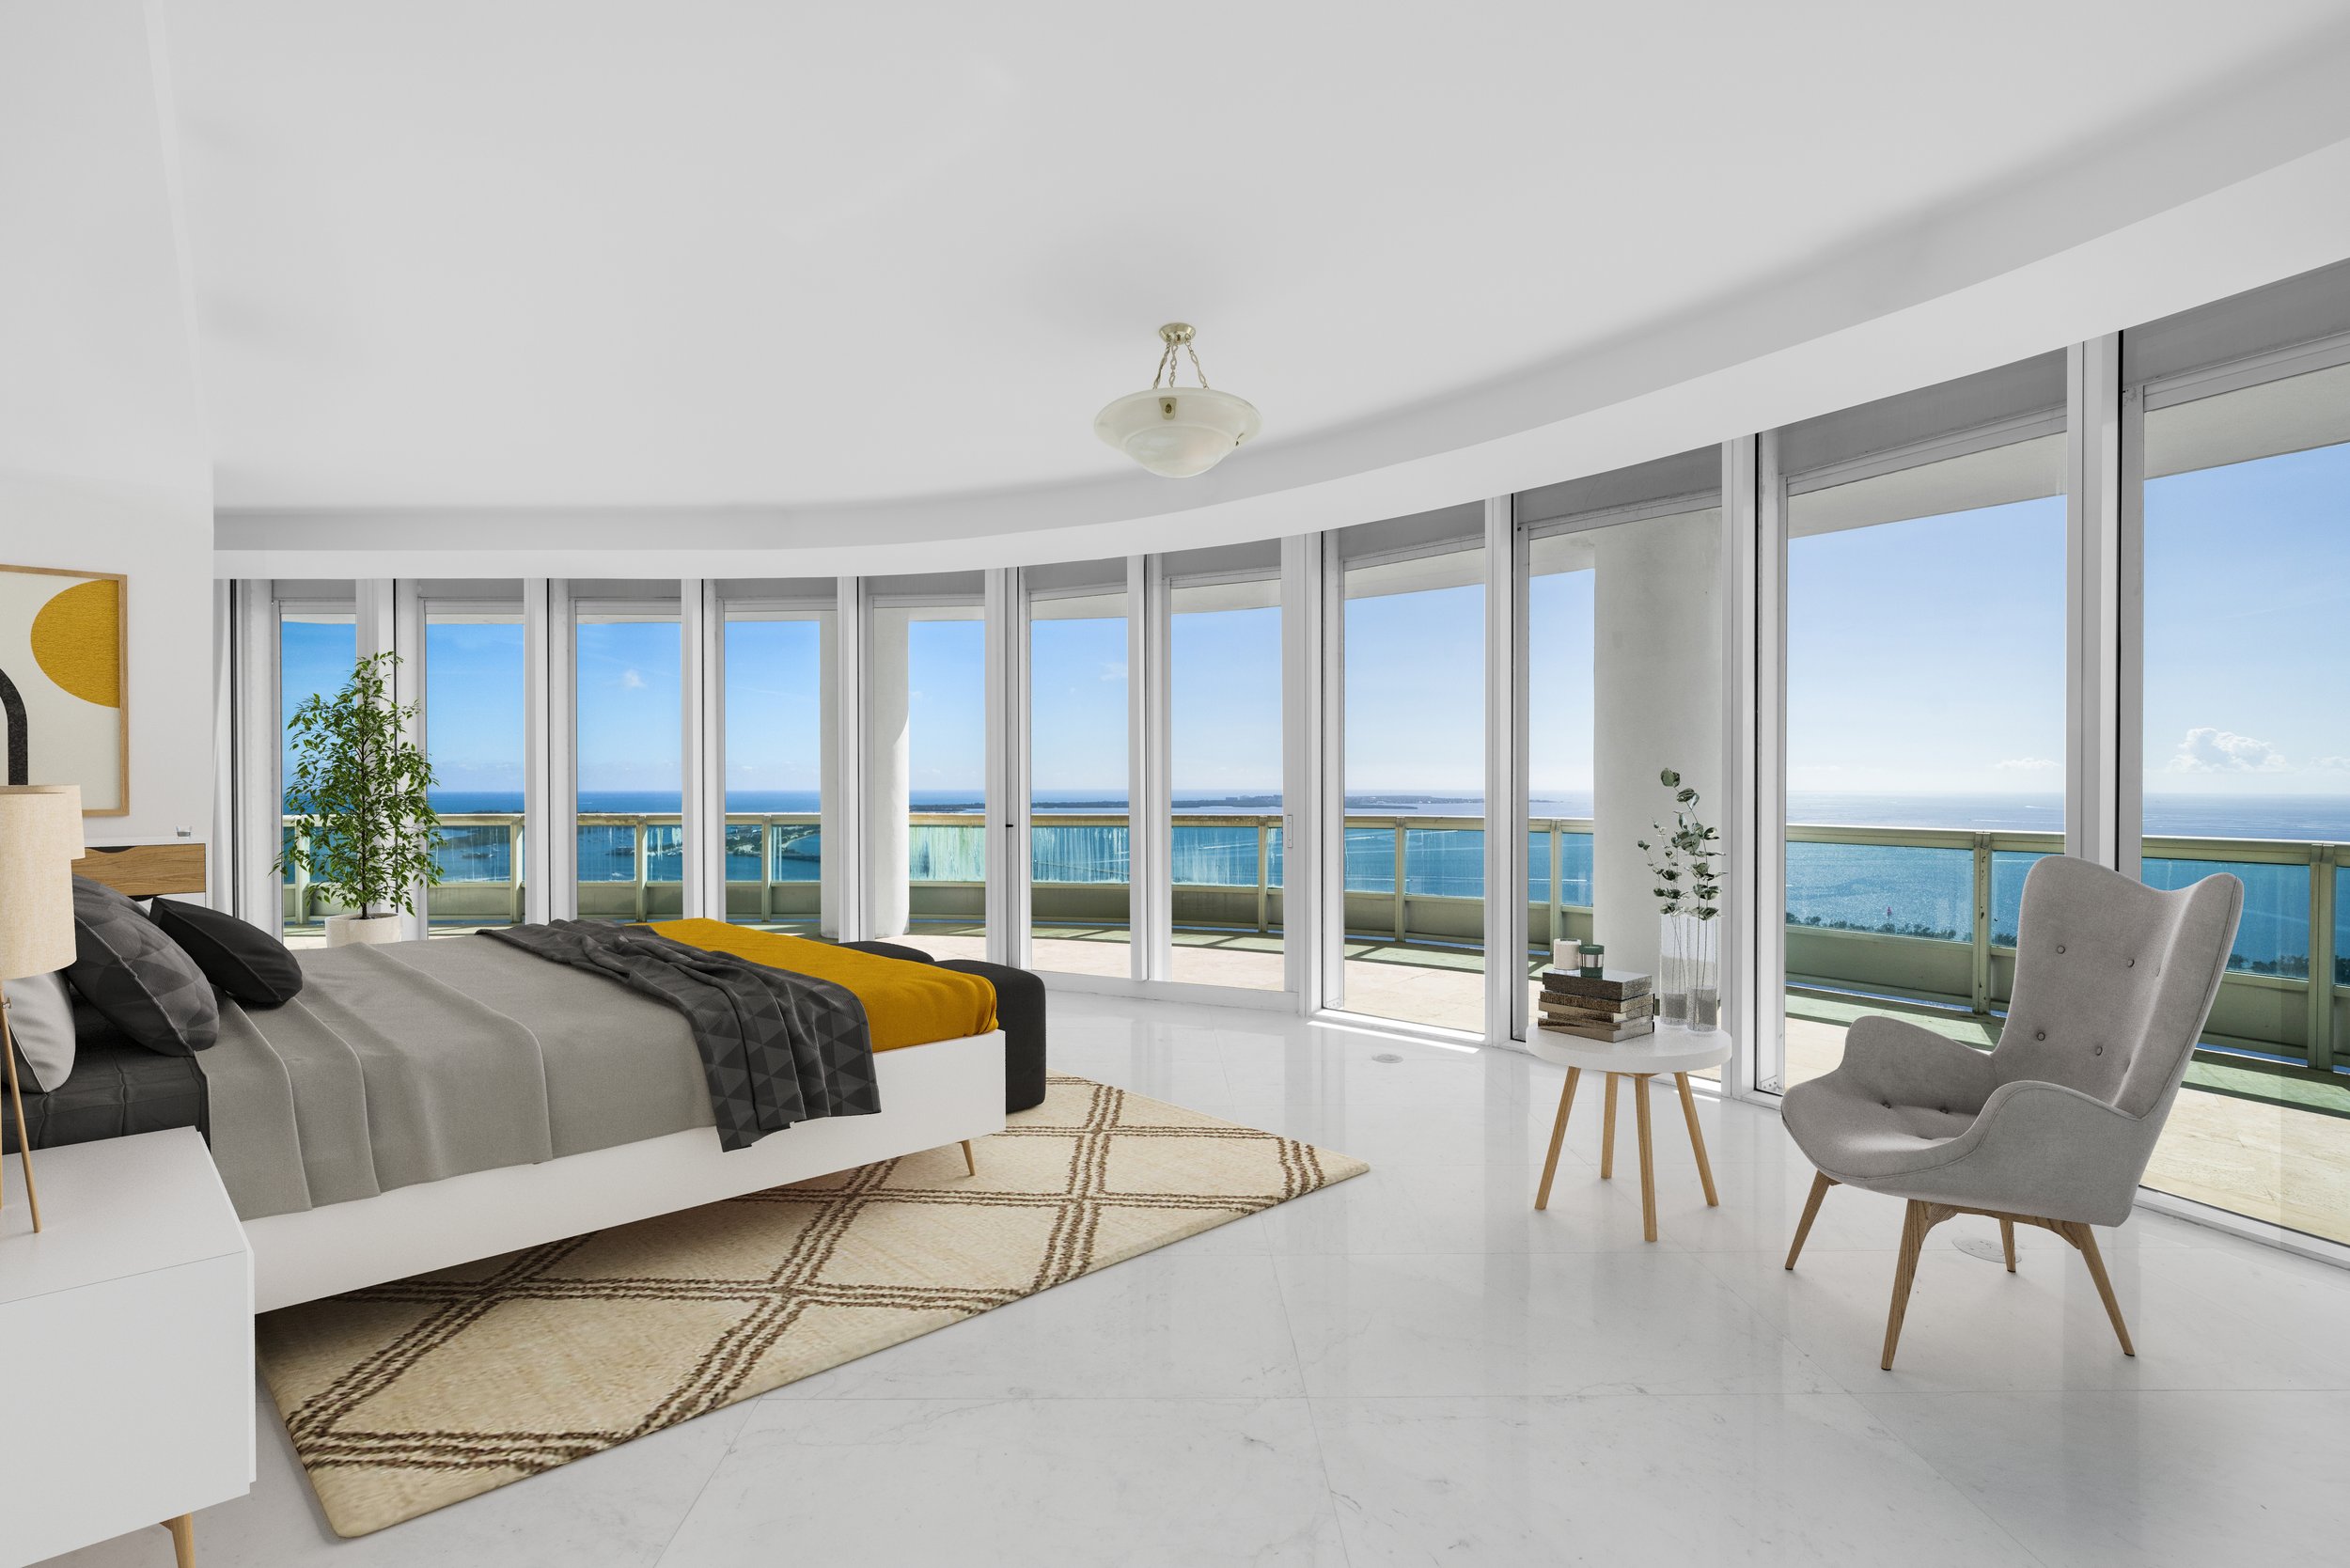 Beyonce, Elton John and Guns N' Roses Former Manager Lists Penthouse Atop Brickell's Exclusive Santa Maria Bayfront Condo Tower For $15 Million6.jpg